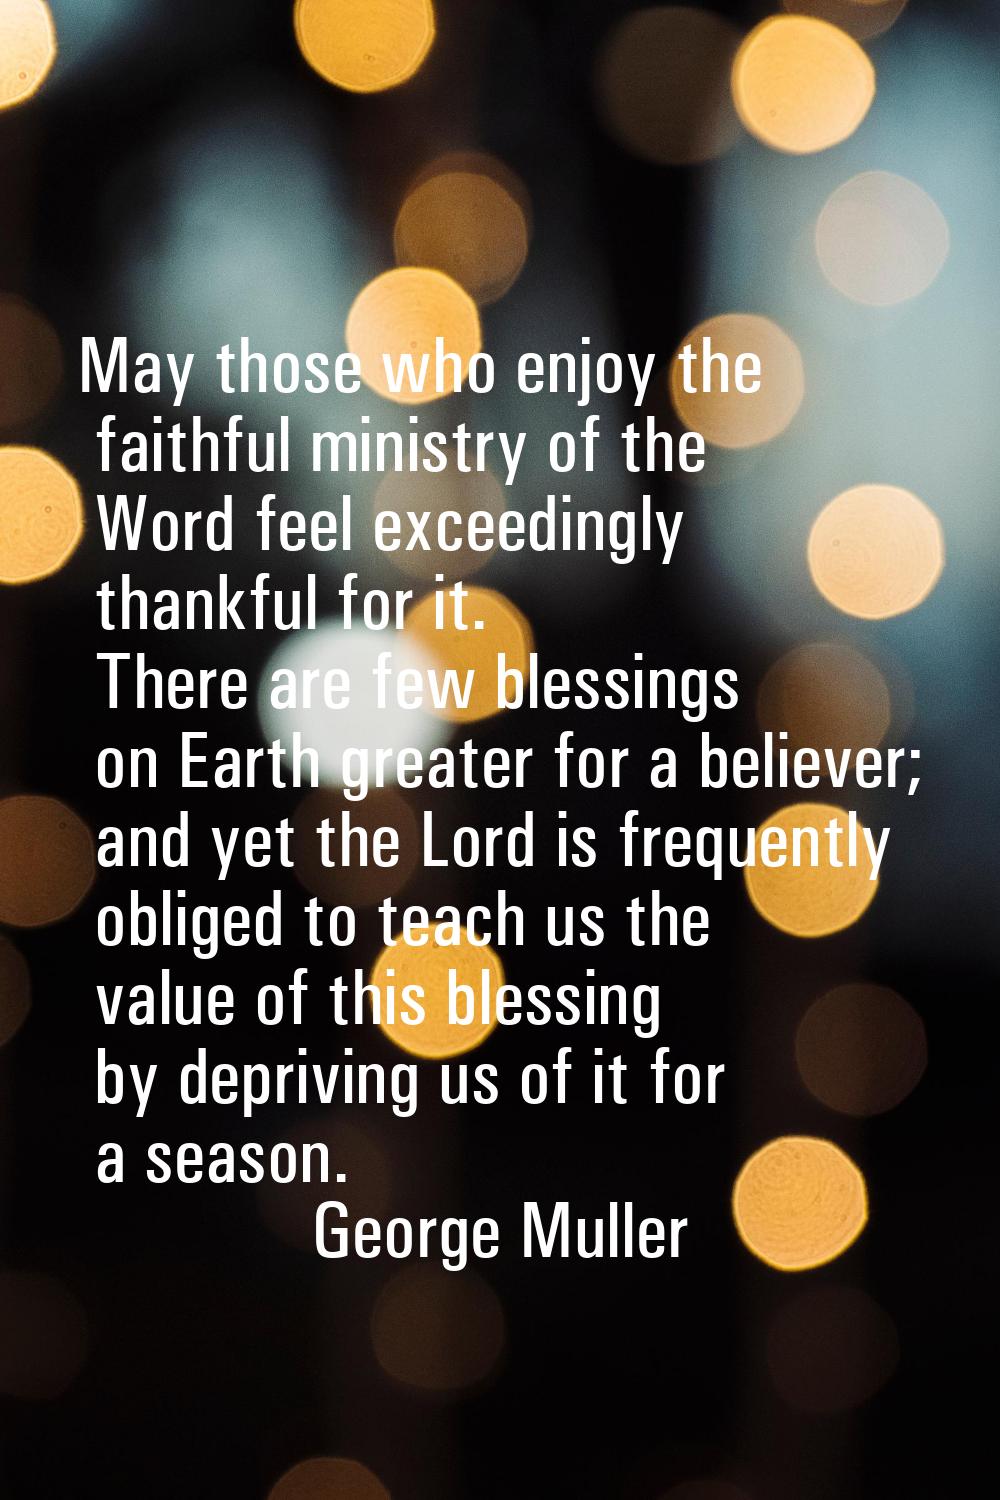 May those who enjoy the faithful ministry of the Word feel exceedingly thankful for it. There are f